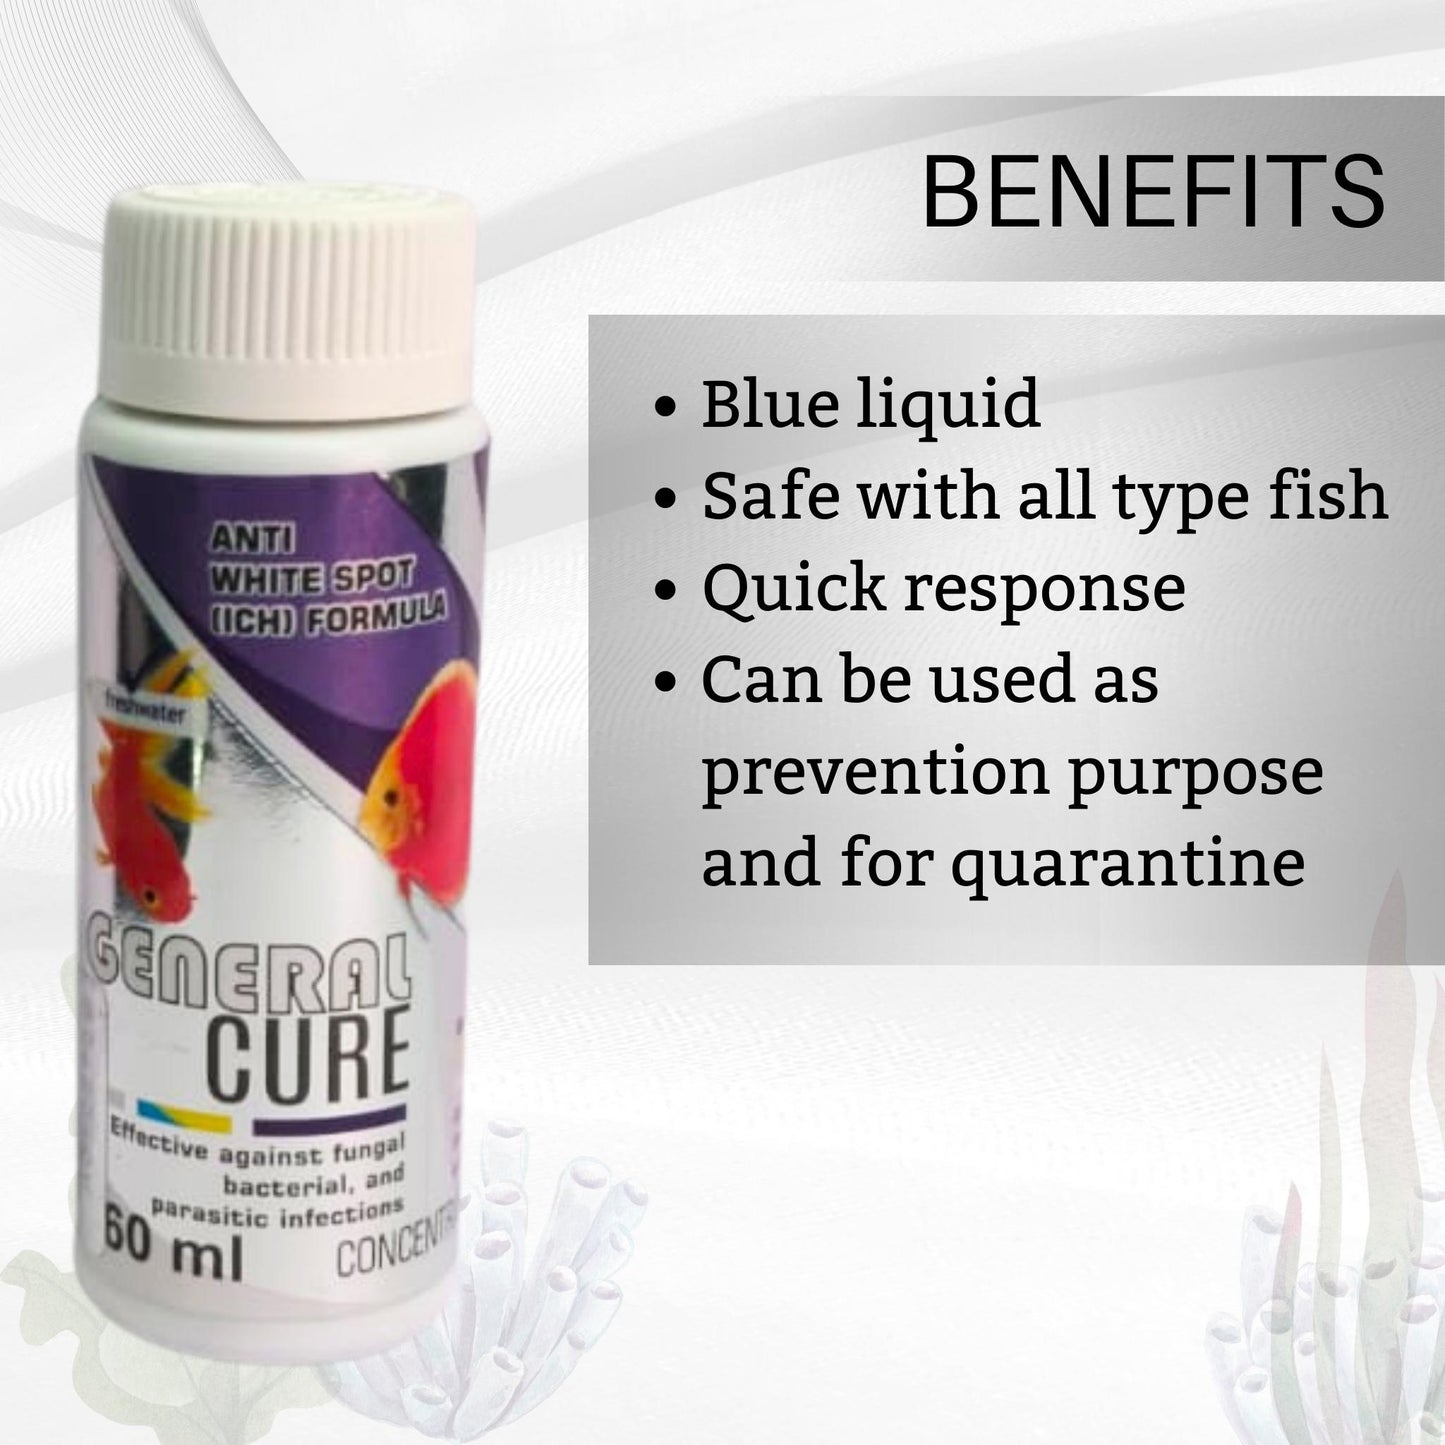 Aquatic Remedies General Cure - 60ml (Pack of 2) | For Fresh Water